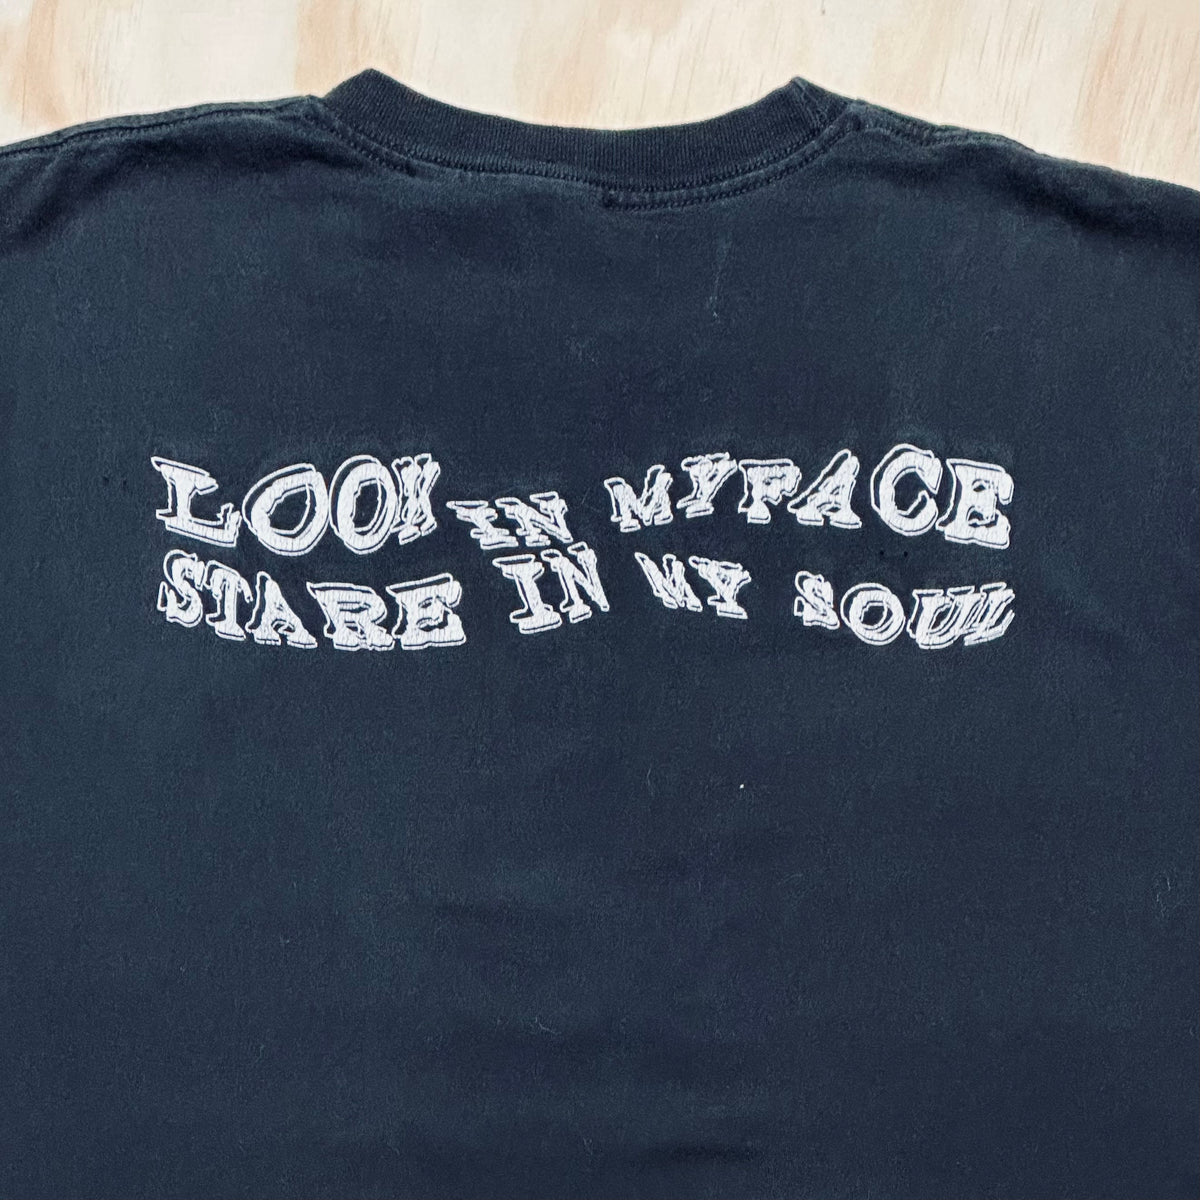 00's Vintage disturbed 'look in my face stare in my soul' album tour shirt